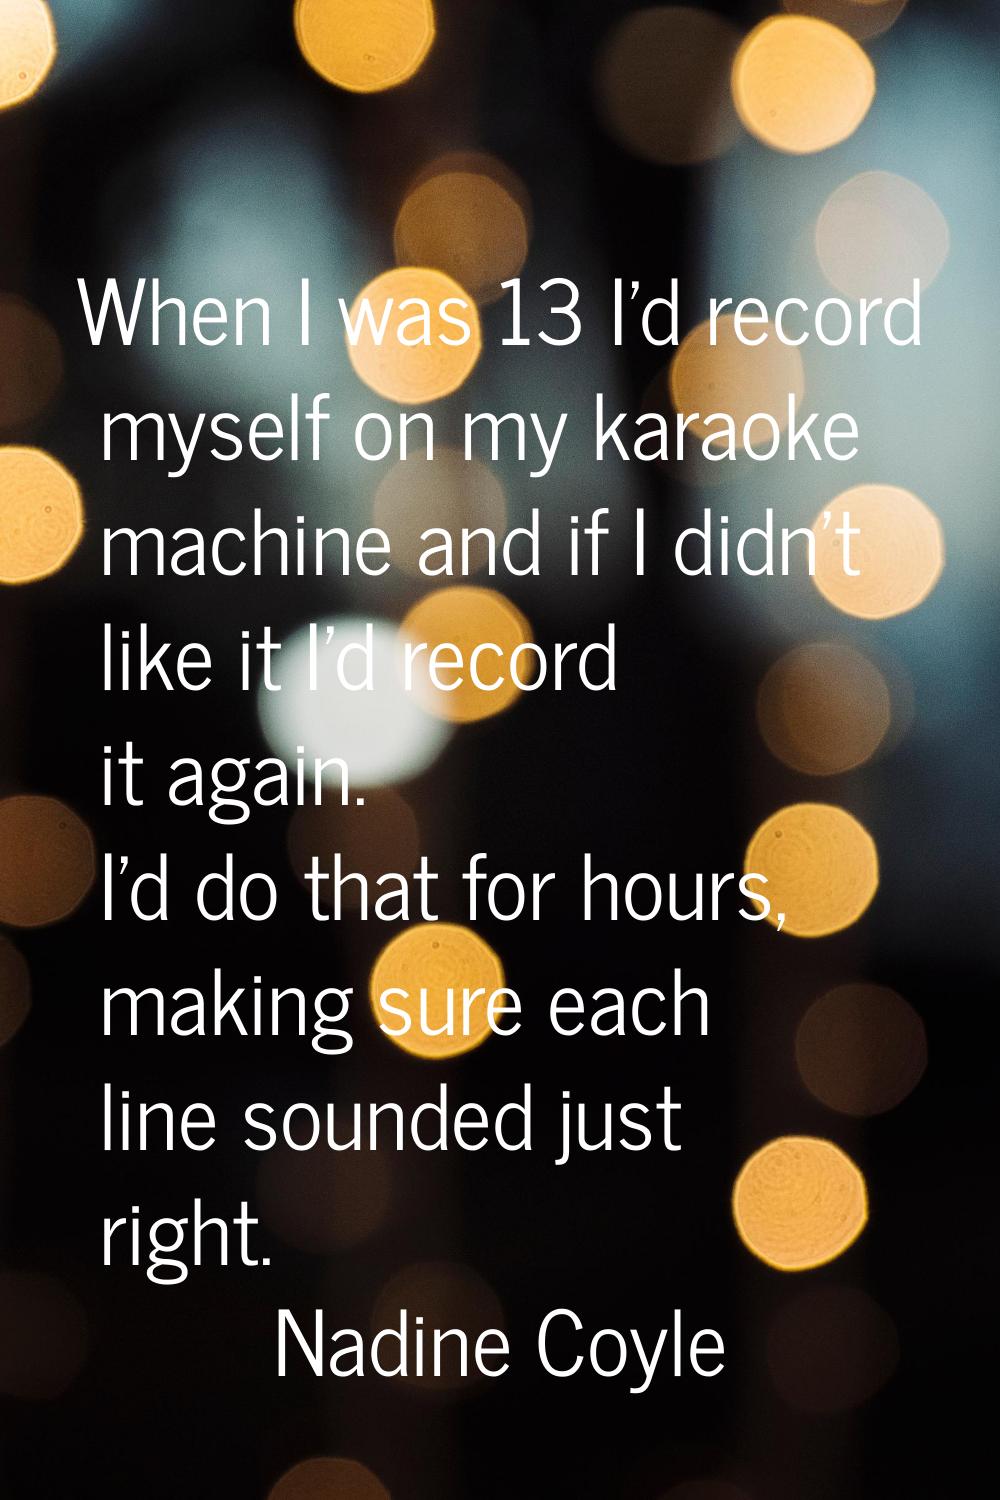 When I was 13 I'd record myself on my karaoke machine and if I didn't like it I'd record it again. 